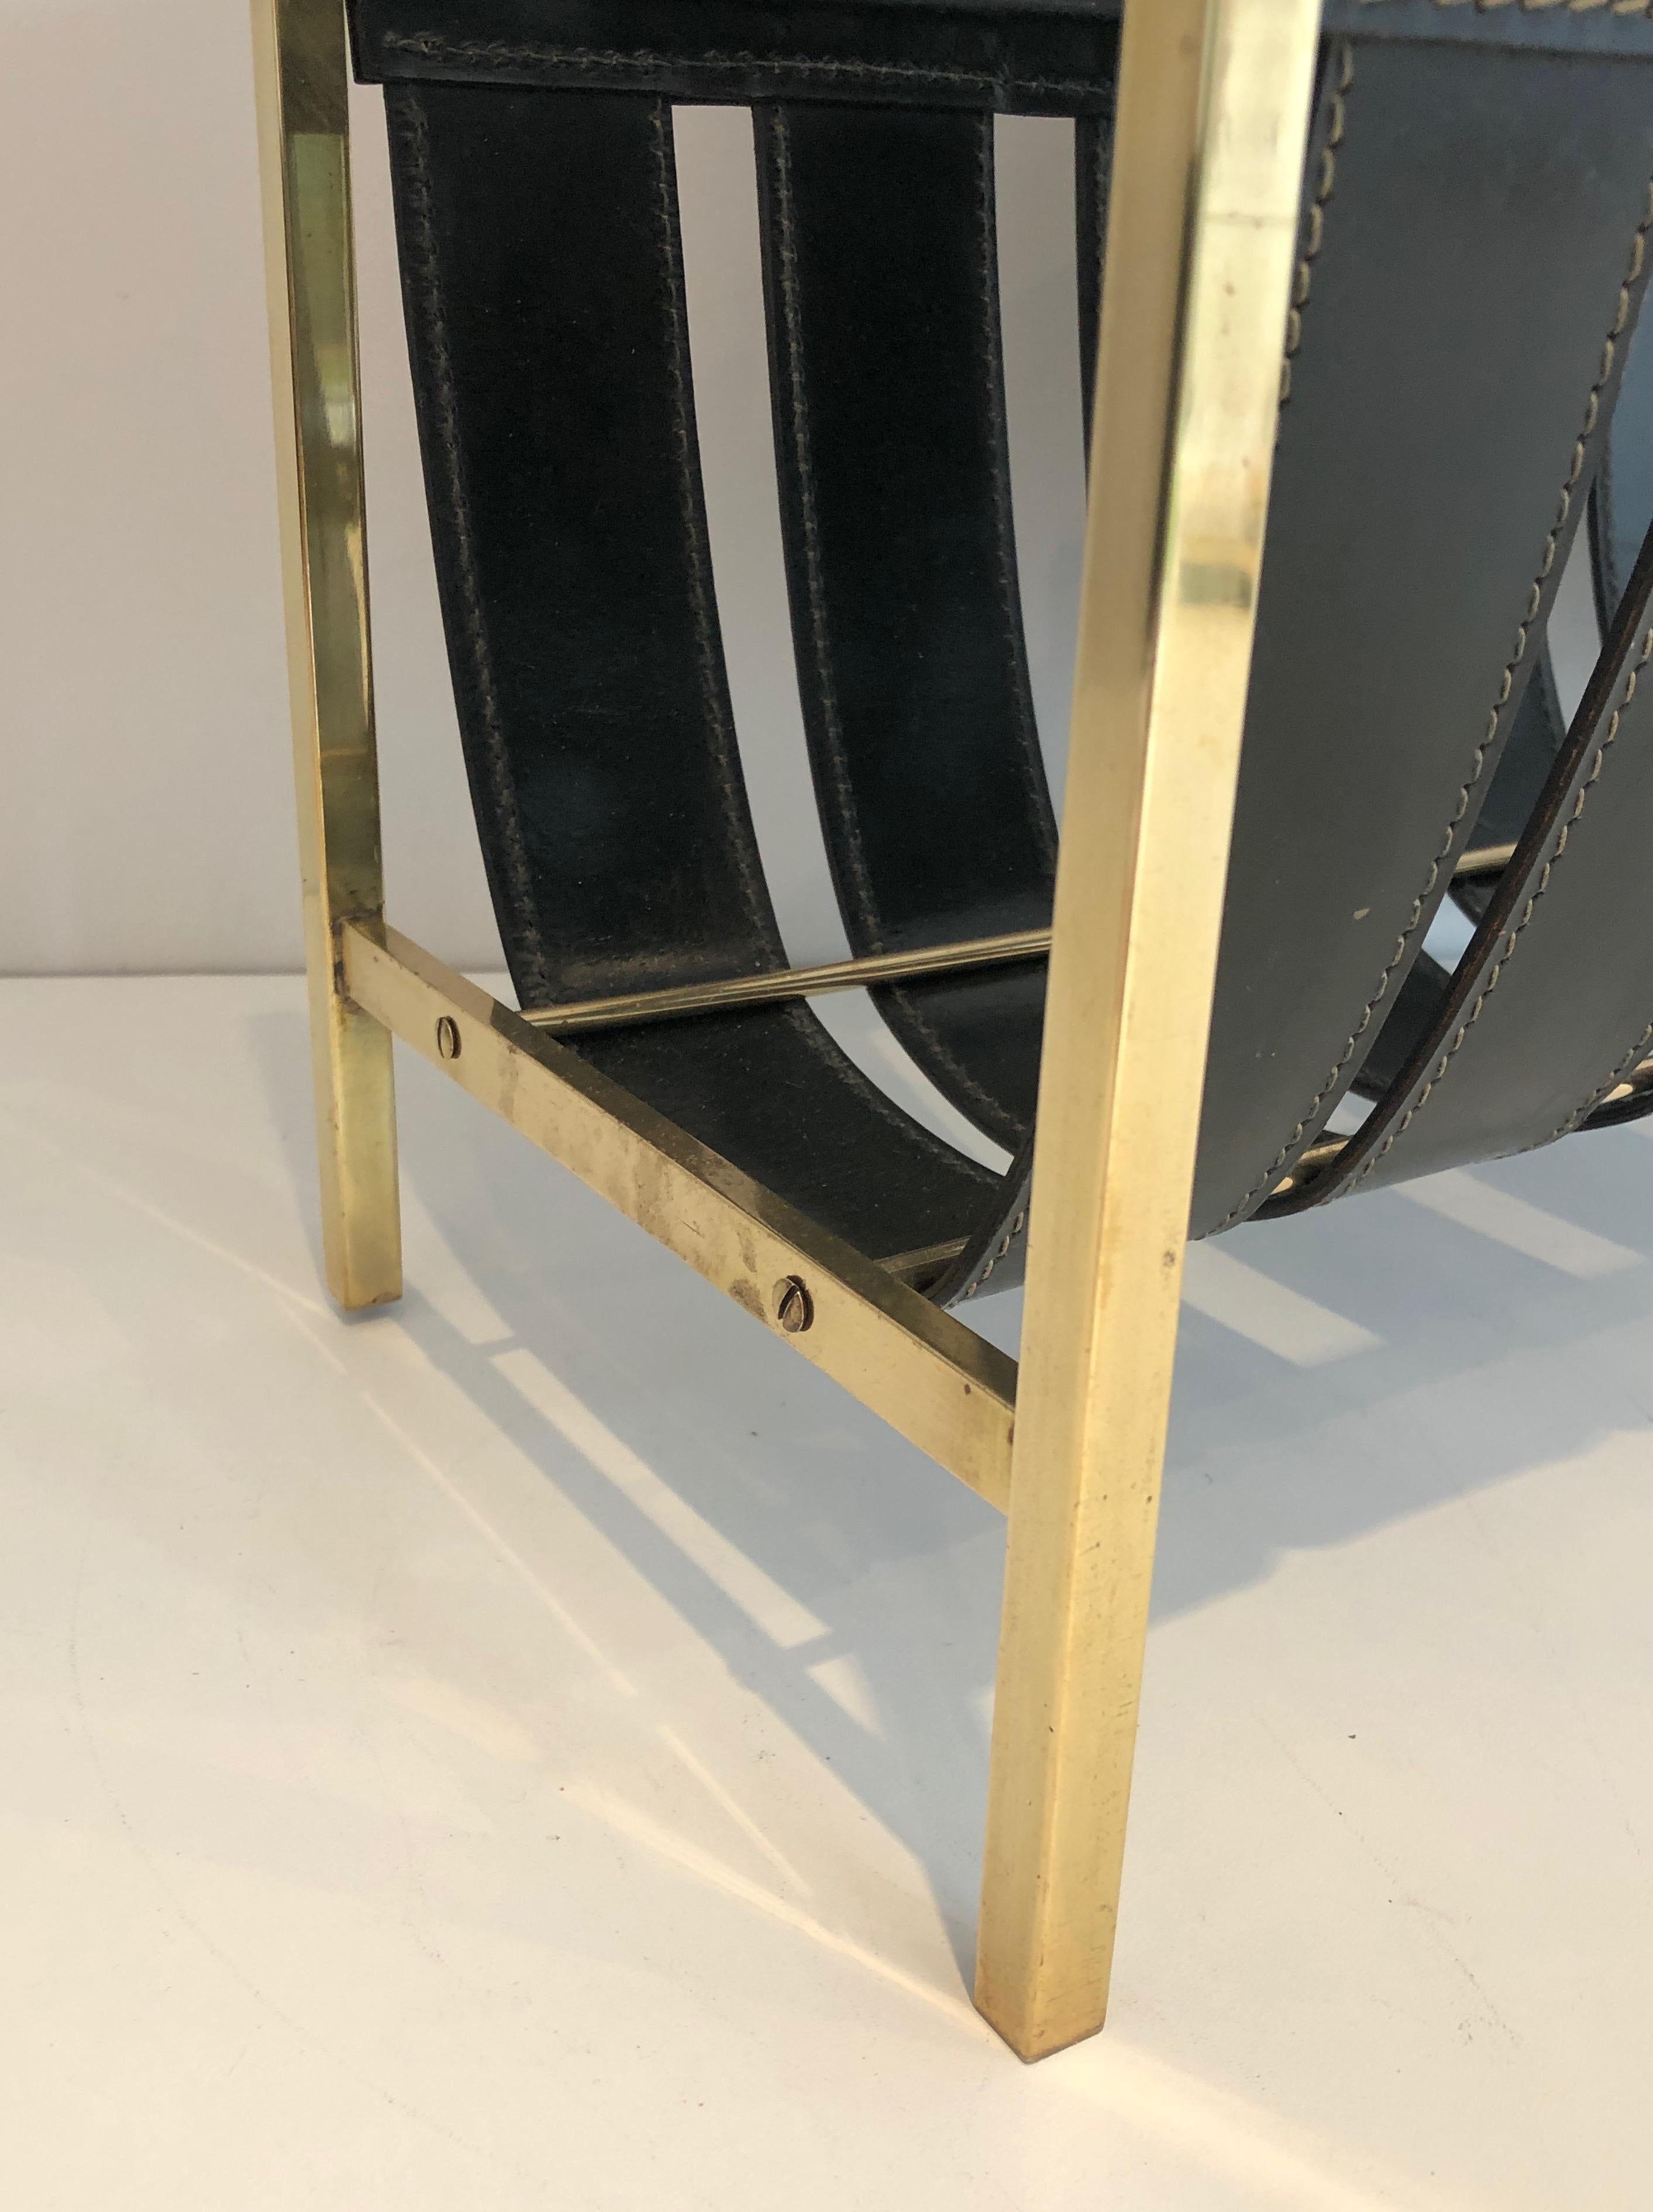 Hand-Bag Brass and Leather Magazine Rack by Jacques Adnet, circa 1940 For Sale 7